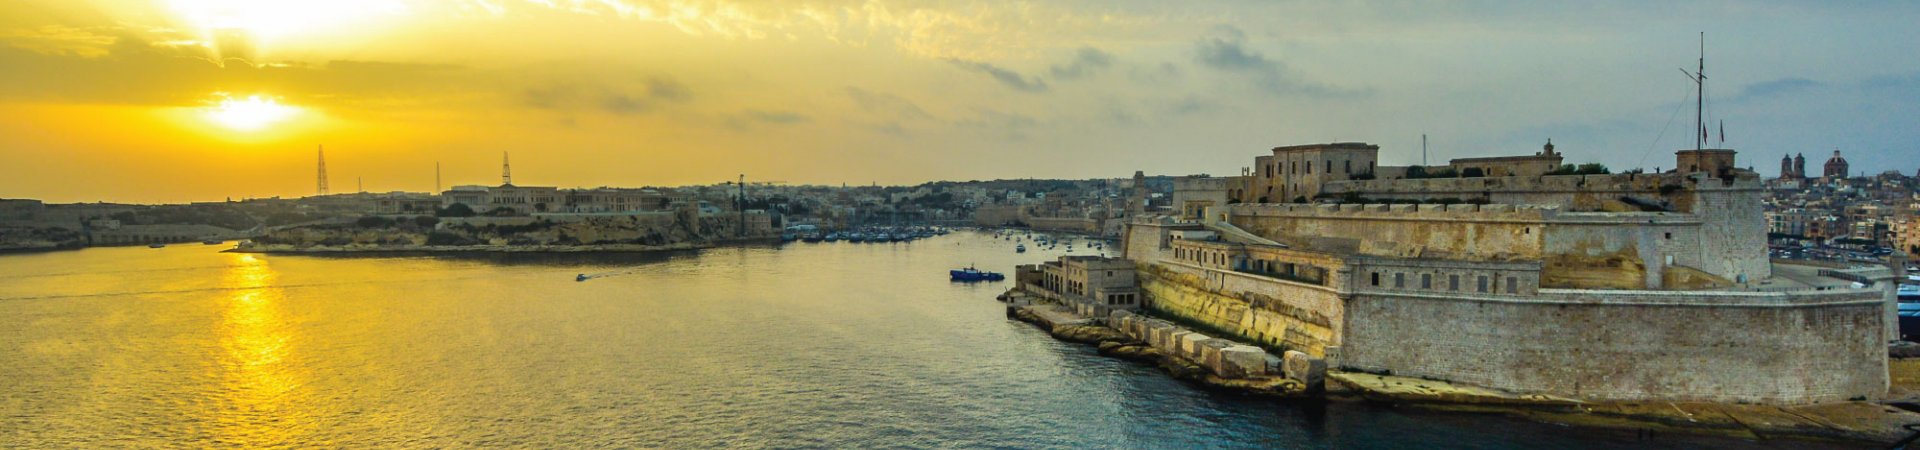 Yachting Gauci and Partners Advocates, malta law firm, malta lawyers, legal services malta, tax services malta, corporate law malta, commercial law malta, finance law malta, marine law malta